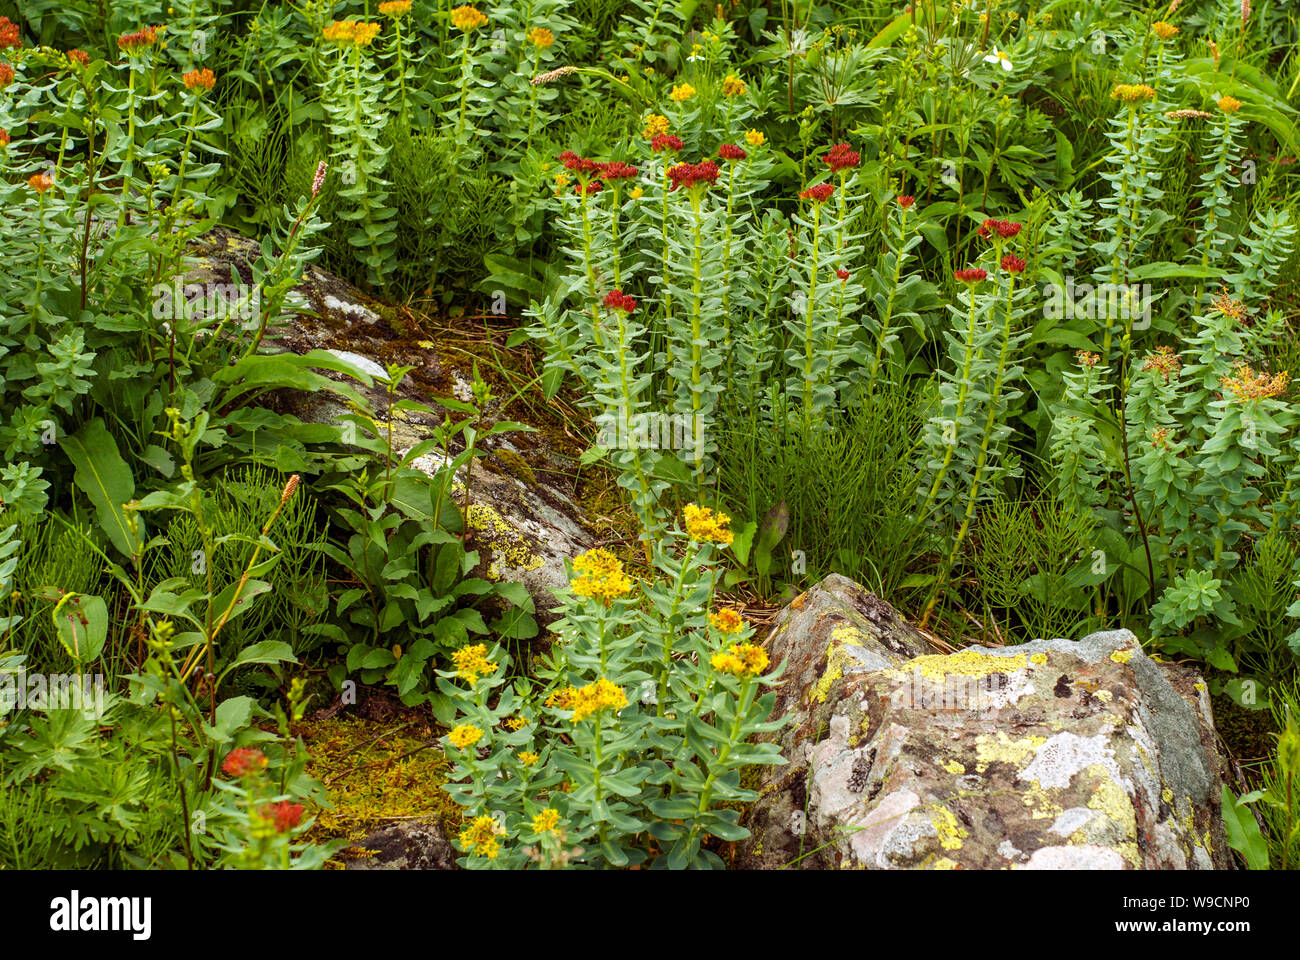 flowering plant golden root (Rhodiola rosea) in a natural environment Stock Photo